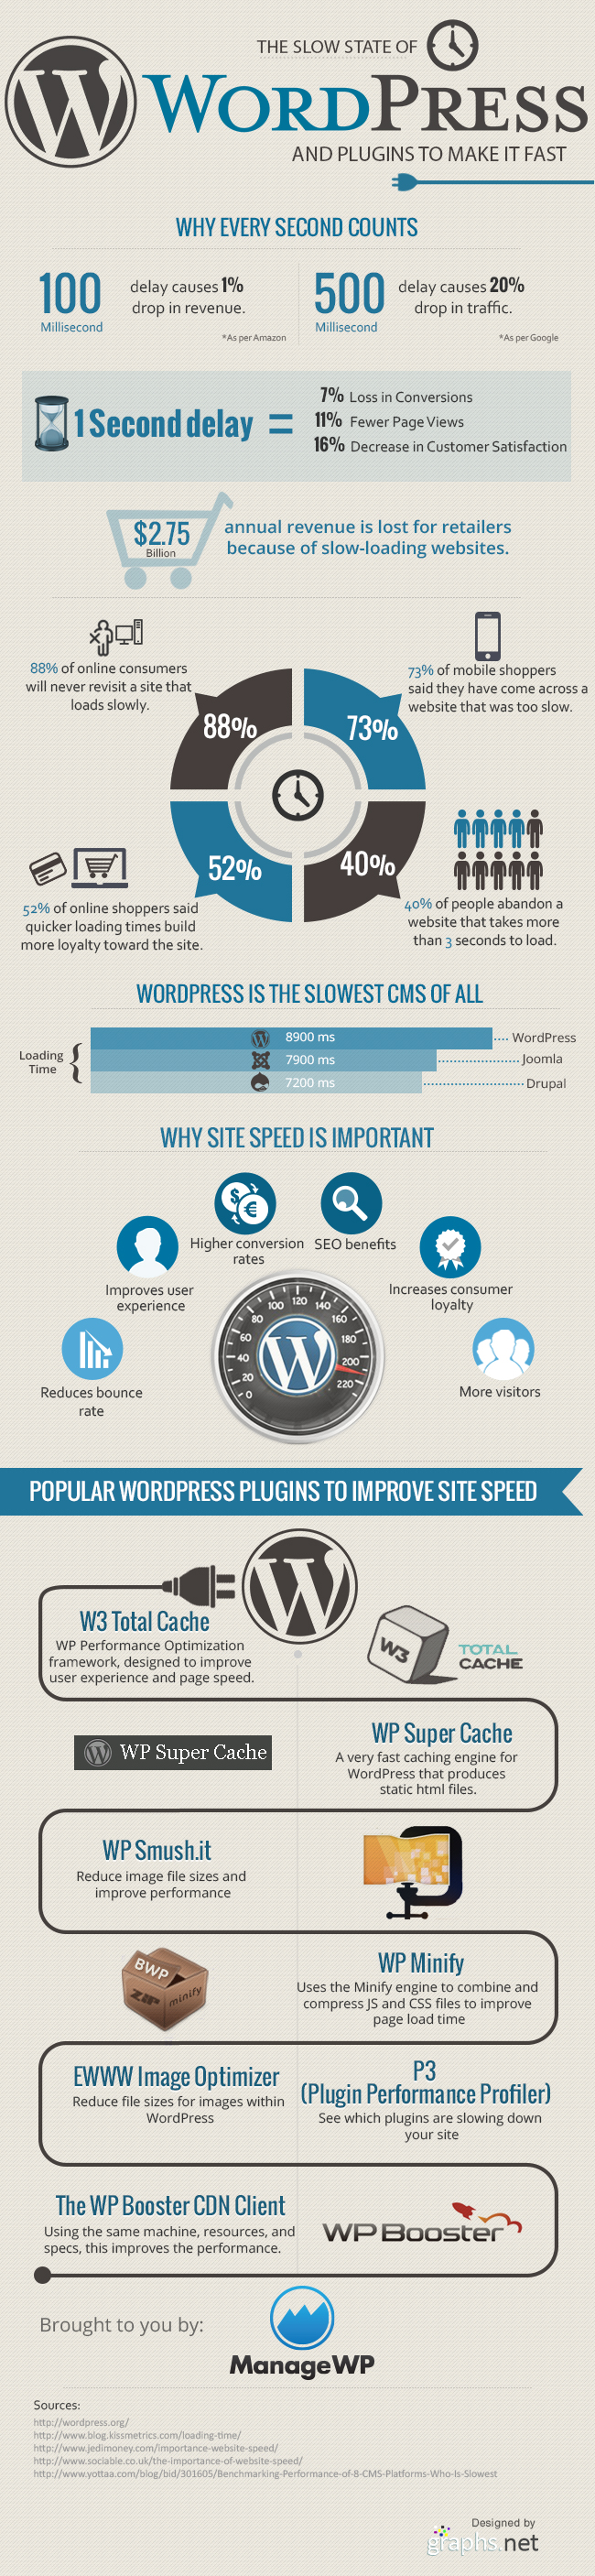 The Slow State of WordPress and Plugins